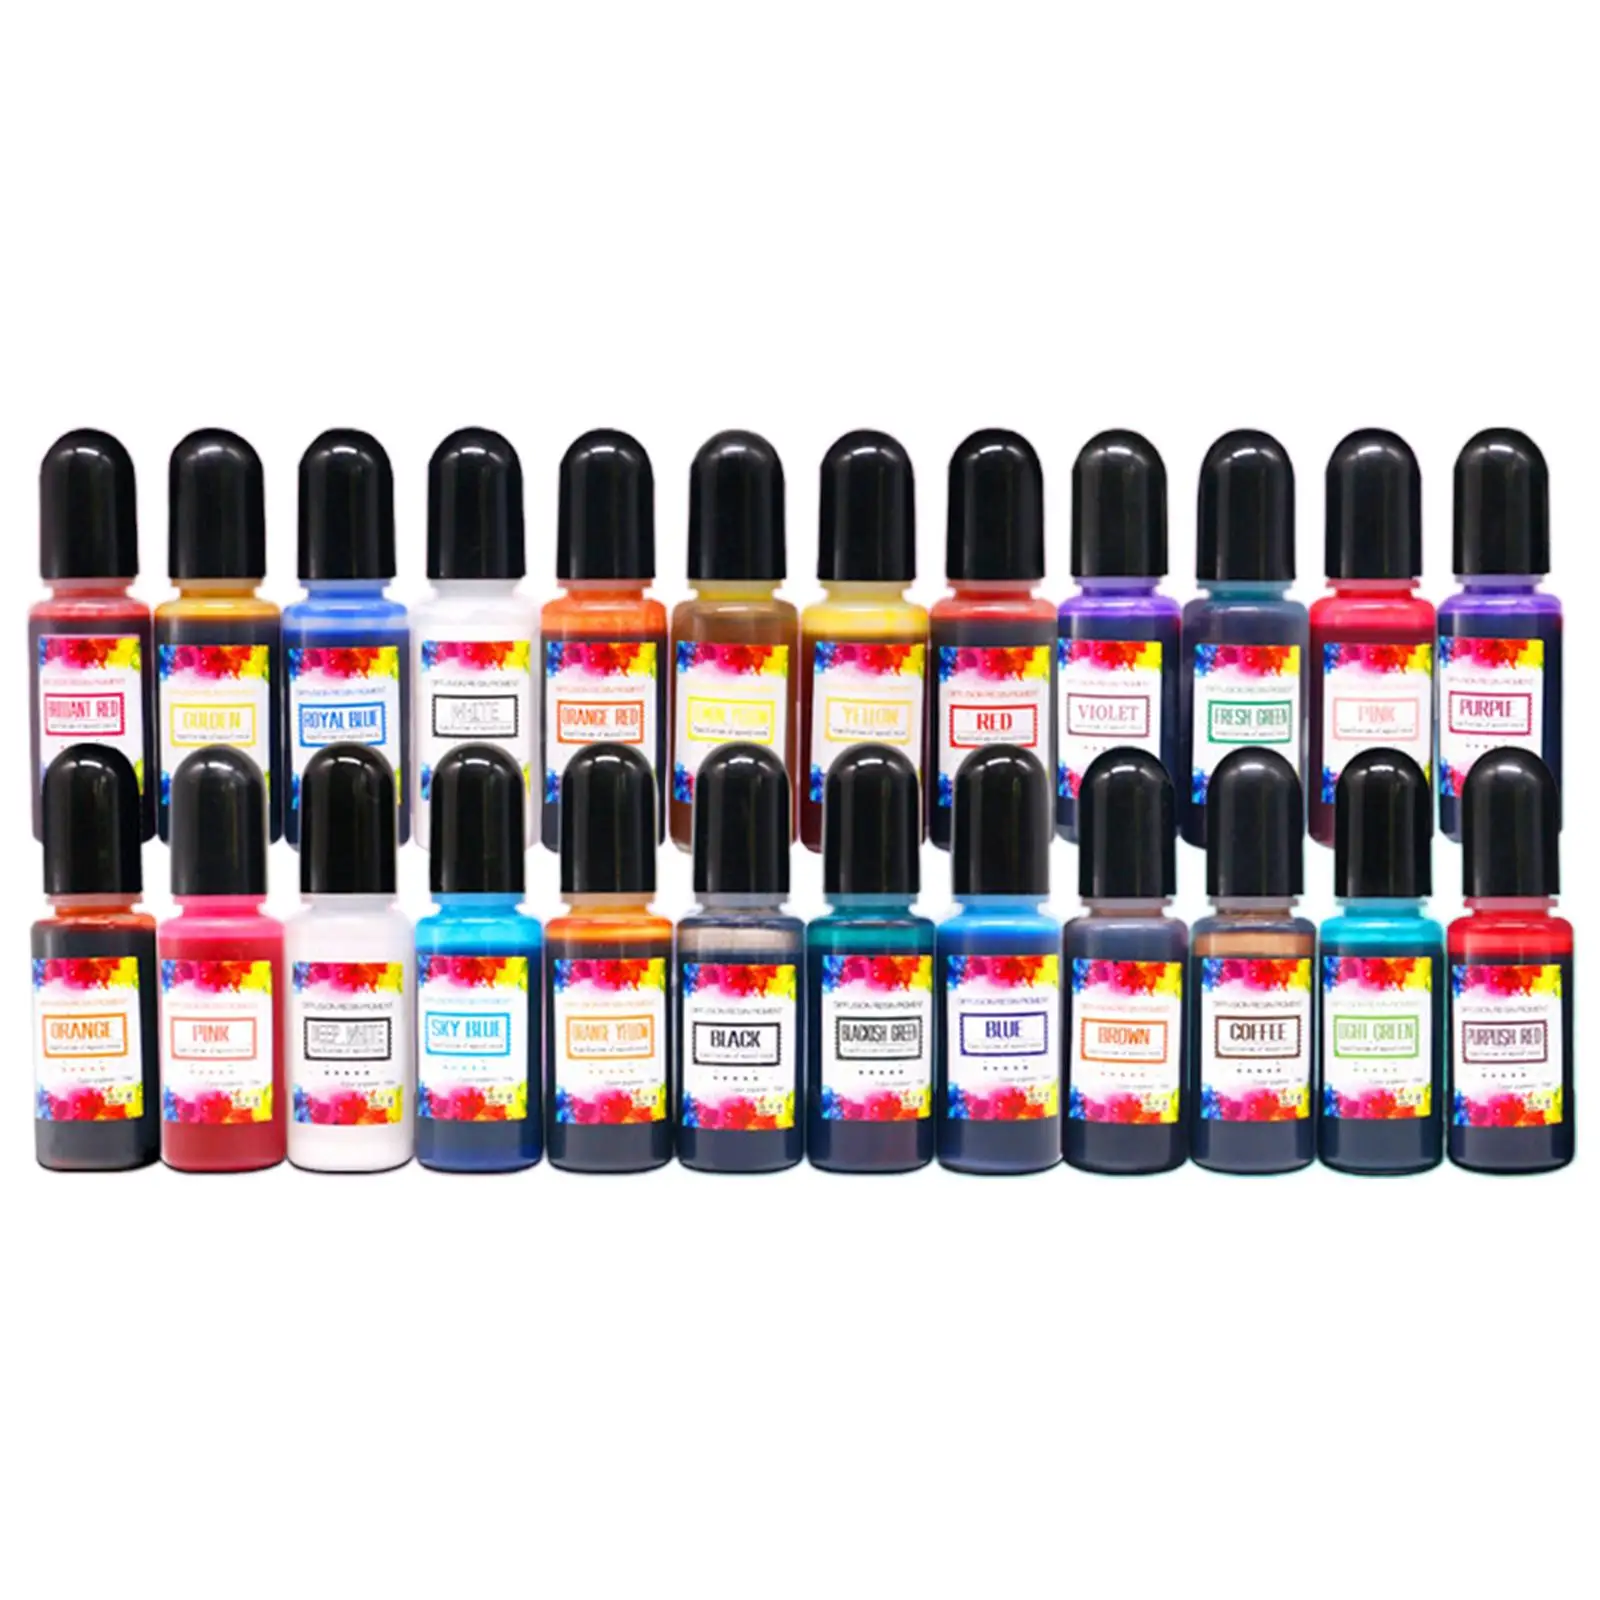 24x Alcohol Inks Epoxy Resin Pigment Colorant Liquid Dye Concentrate Color Dye 10ml for Acrylic Paint Scrapbook DIY Crafts Paint